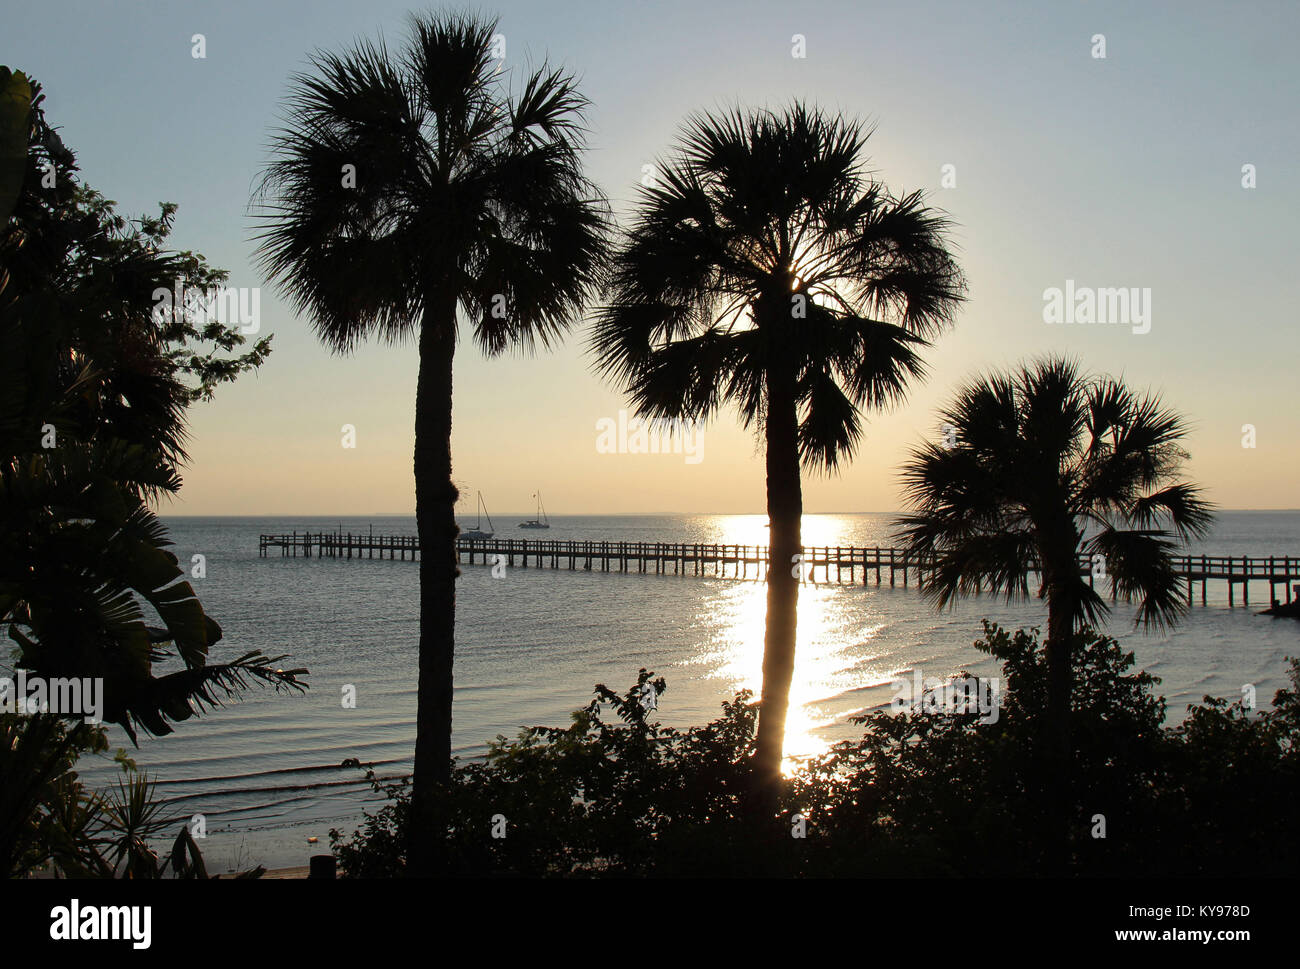 Silhouettes of palm trees and fishing pier at sunset, Charlotte Harbor Florida, Stock Photo